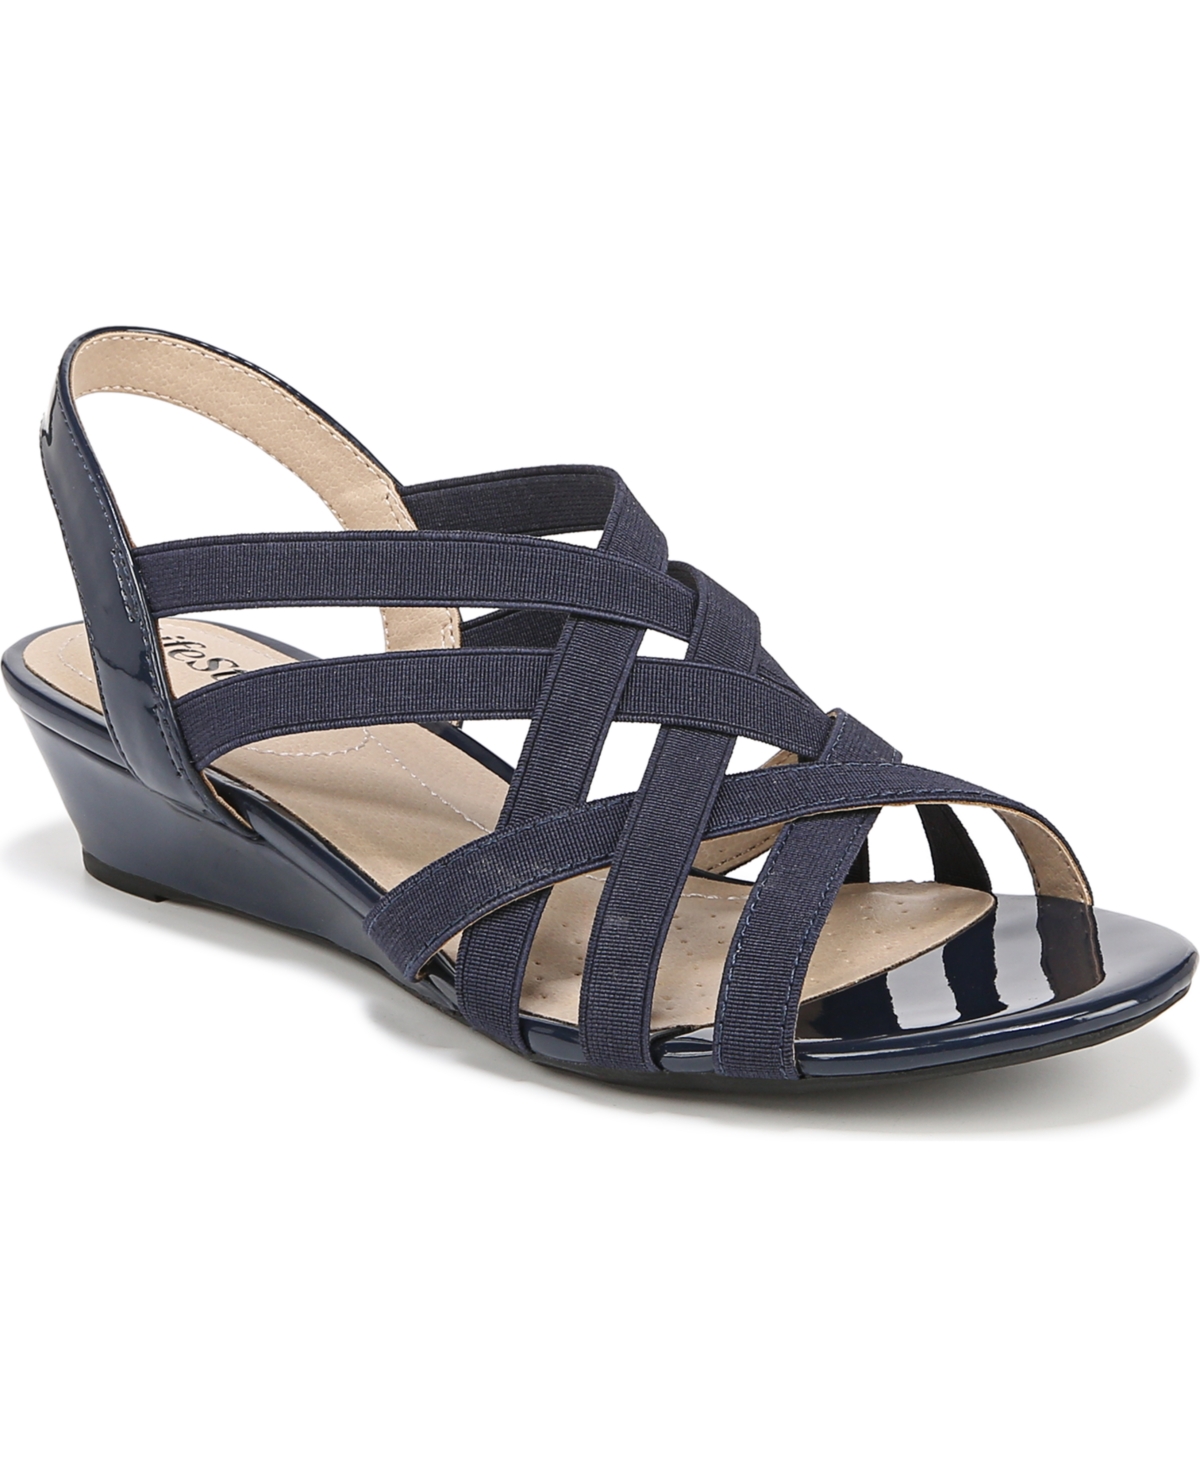 Lifestride Yung Strappy Wedge Sandals In Lux Navy Faux Leather,fabric